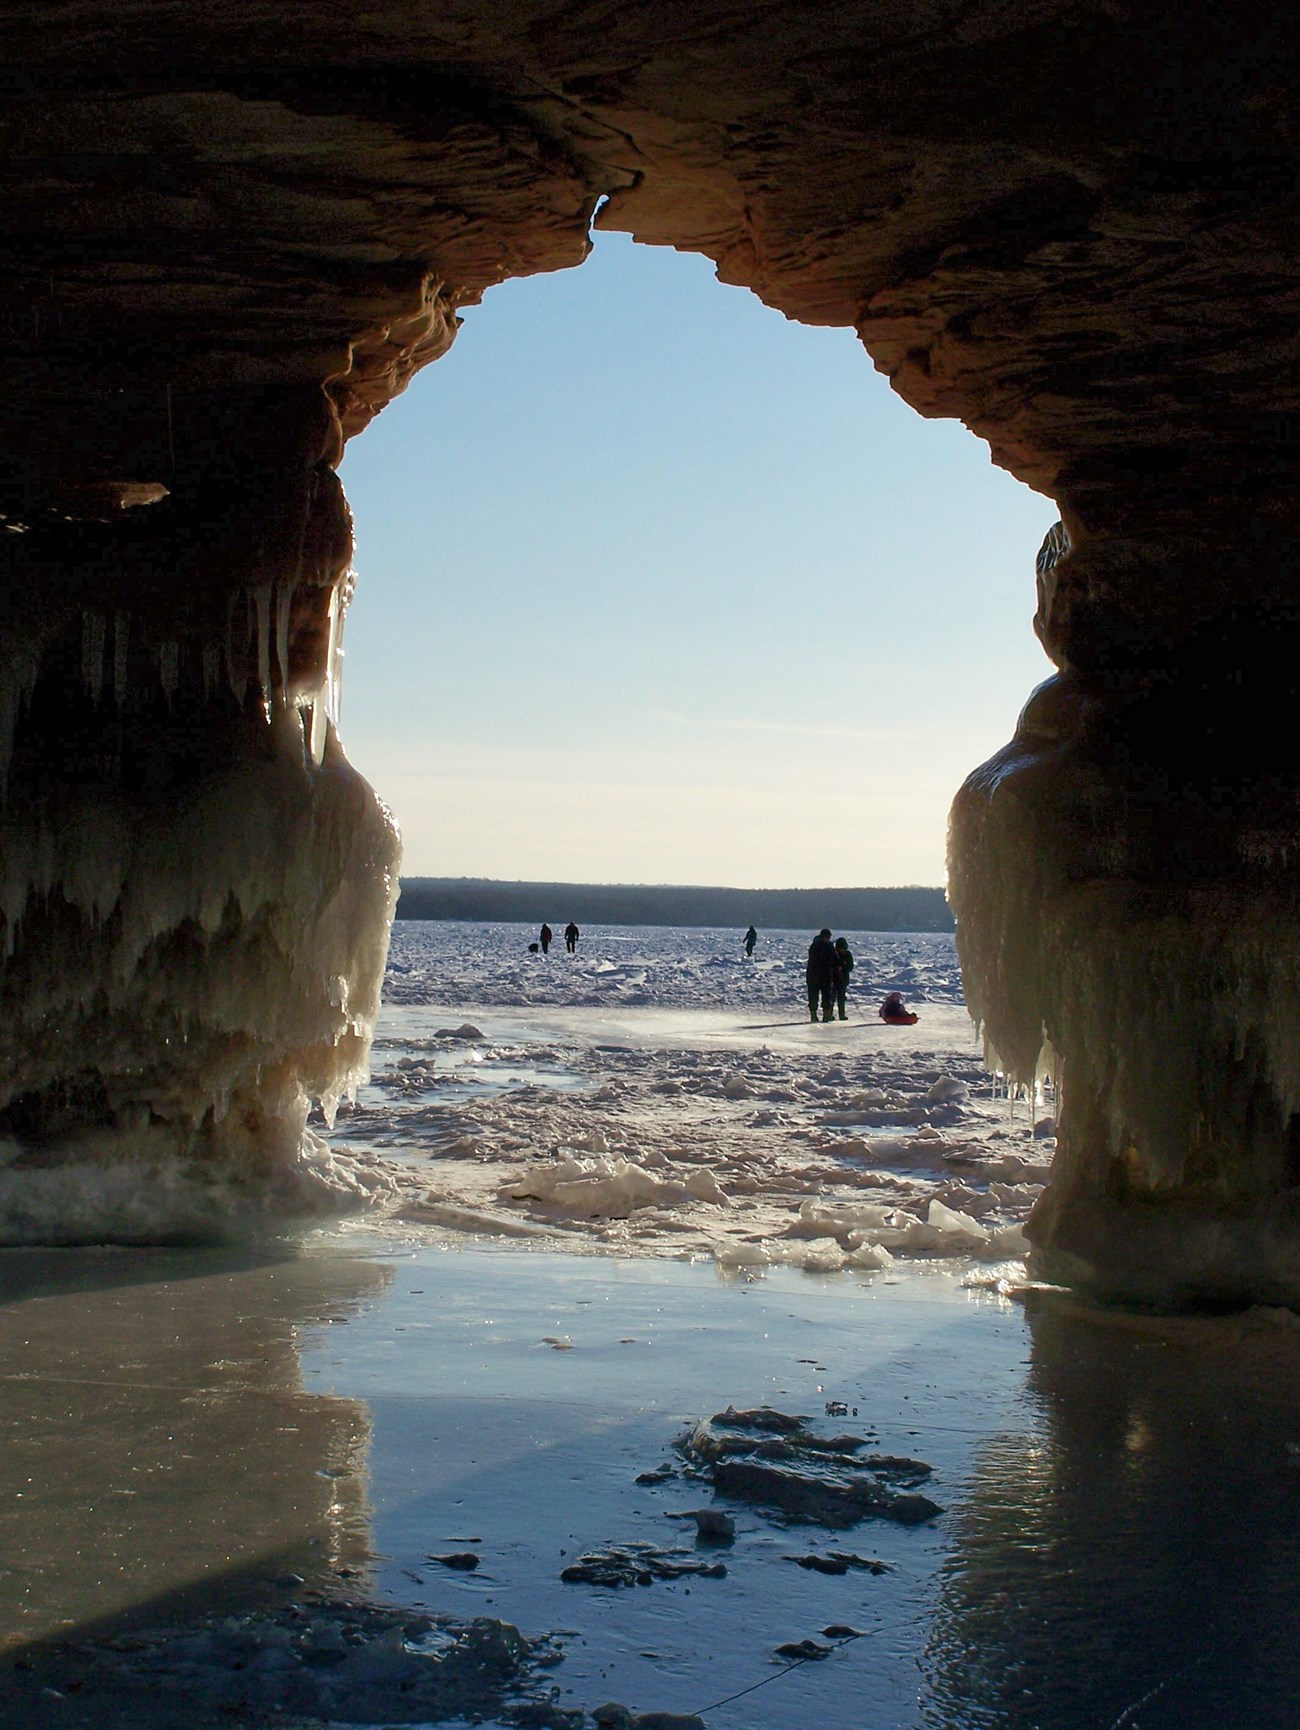 A cave entrance leads out to a frozen lake.